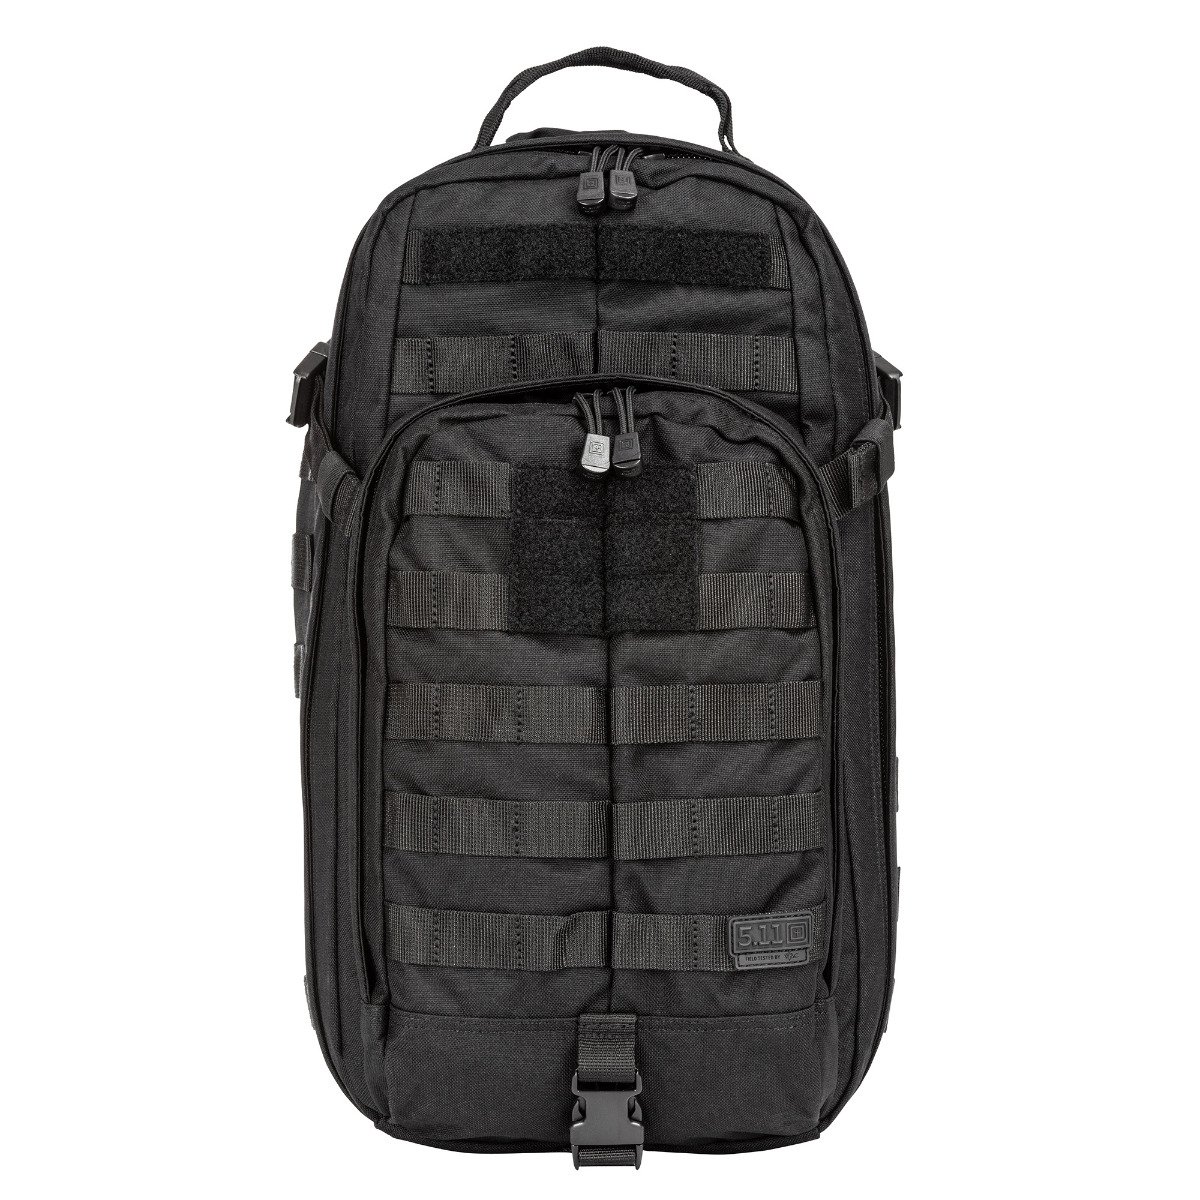 5.11 Work Gear Rush MOAB 10 Pack, Water-Resistant, Customizable Bag, Black, 1 SZ, Style 56964 - image 2 of 6